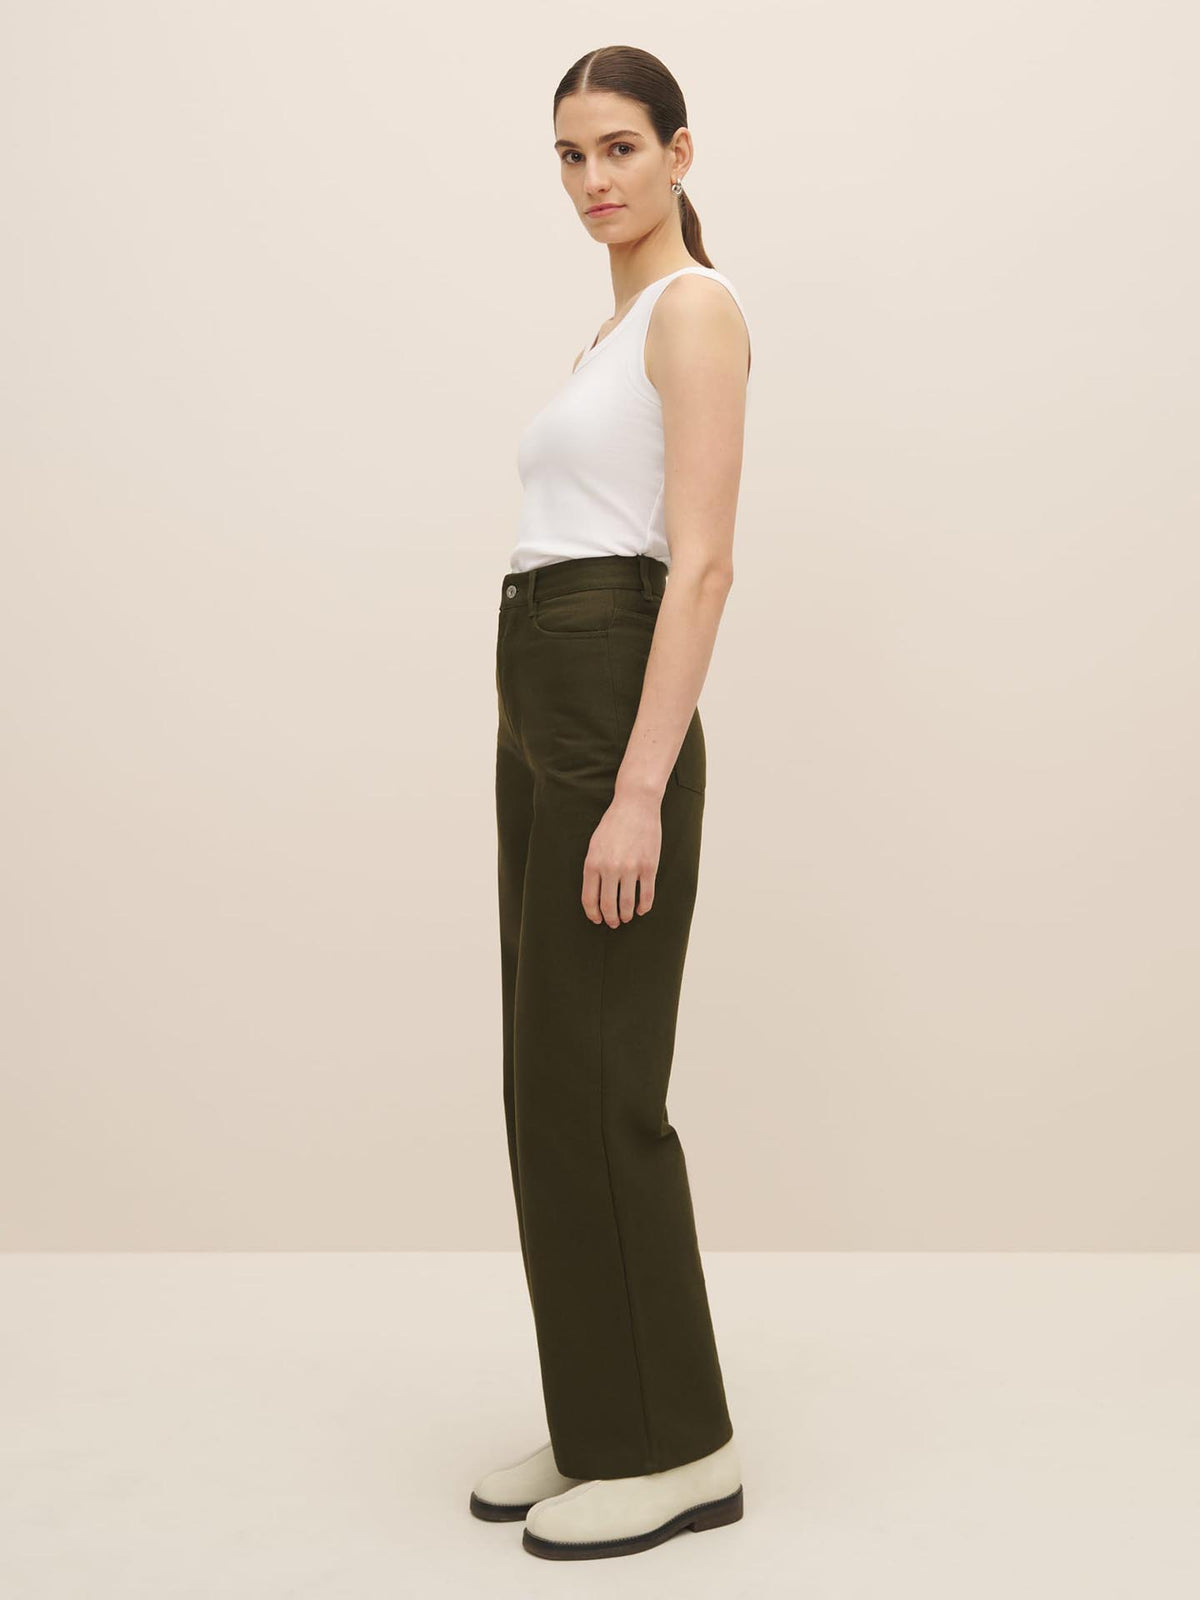 The model is wearing a white tank top and green trousers made with organic cotton by Kowtow.